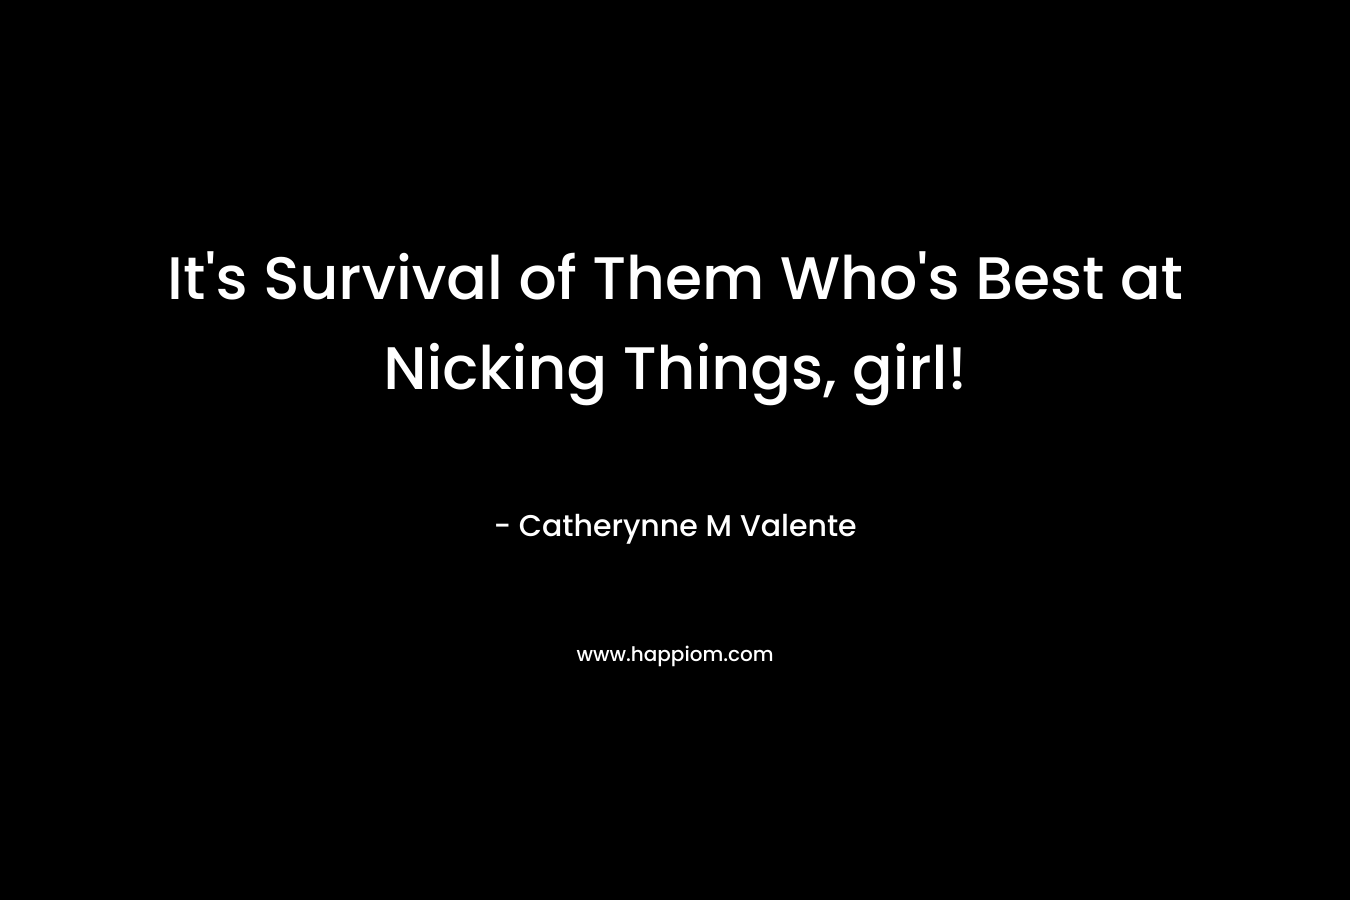 It’s Survival of Them Who’s Best at Nicking Things, girl! – Catherynne M Valente